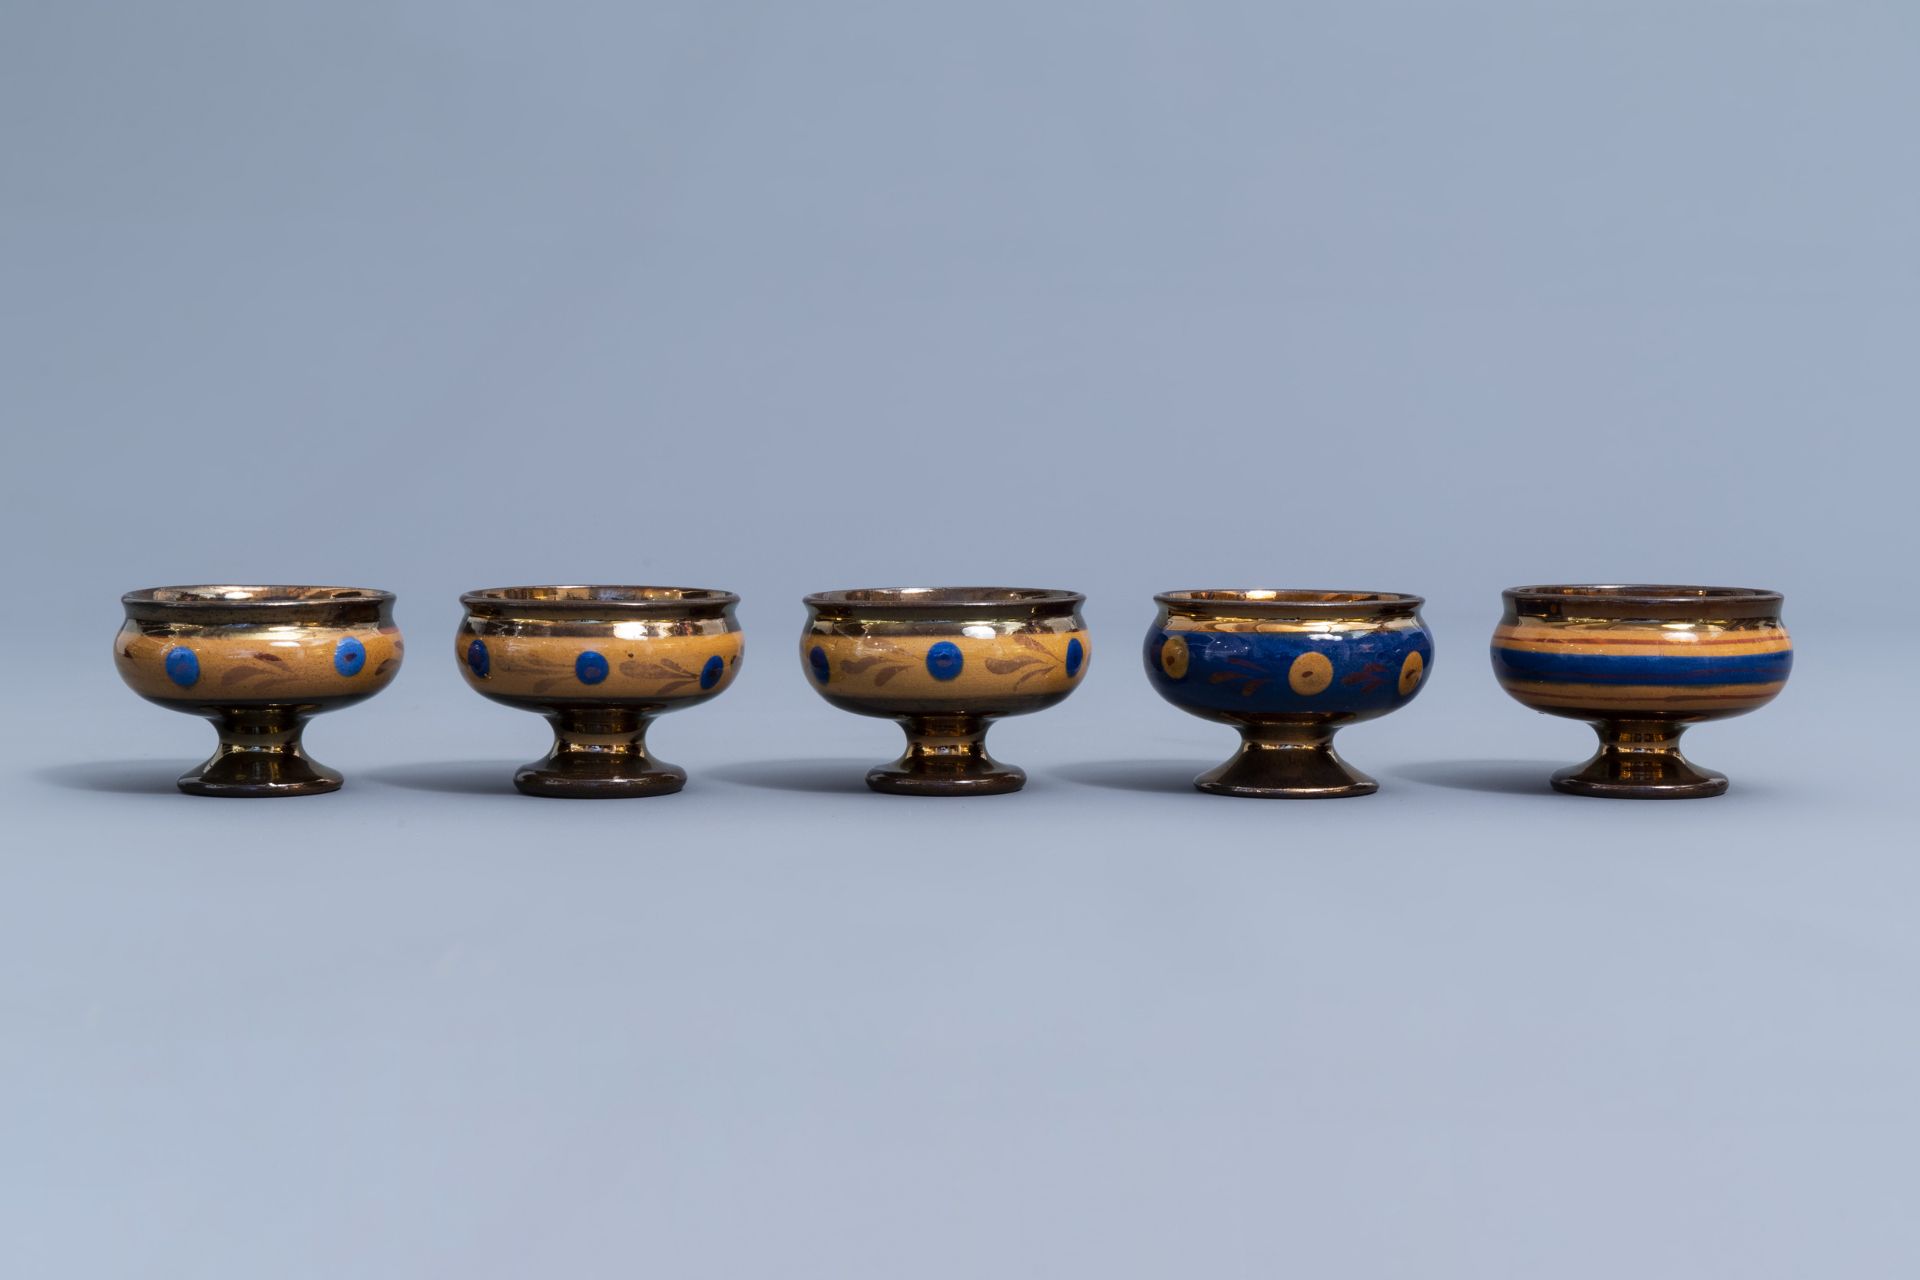 A varied collection of English lustreware items with blue design, 19th C. - Image 17 of 50